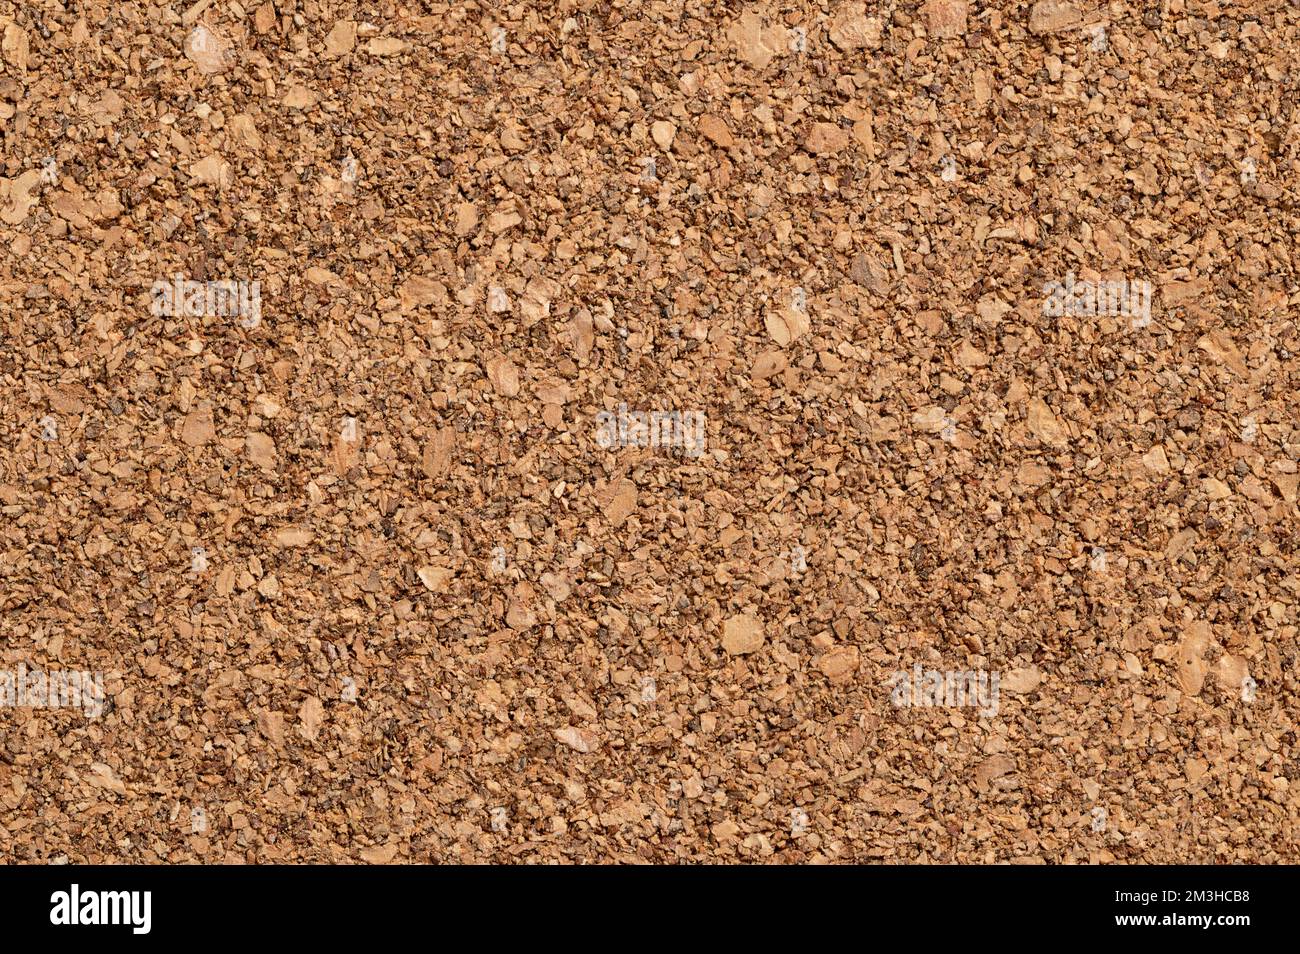 Untreated cork panel, close-up of the coarse texture of rough grained cork oak, Quercus suber. Used as decorative panels and veneers. Stock Photo